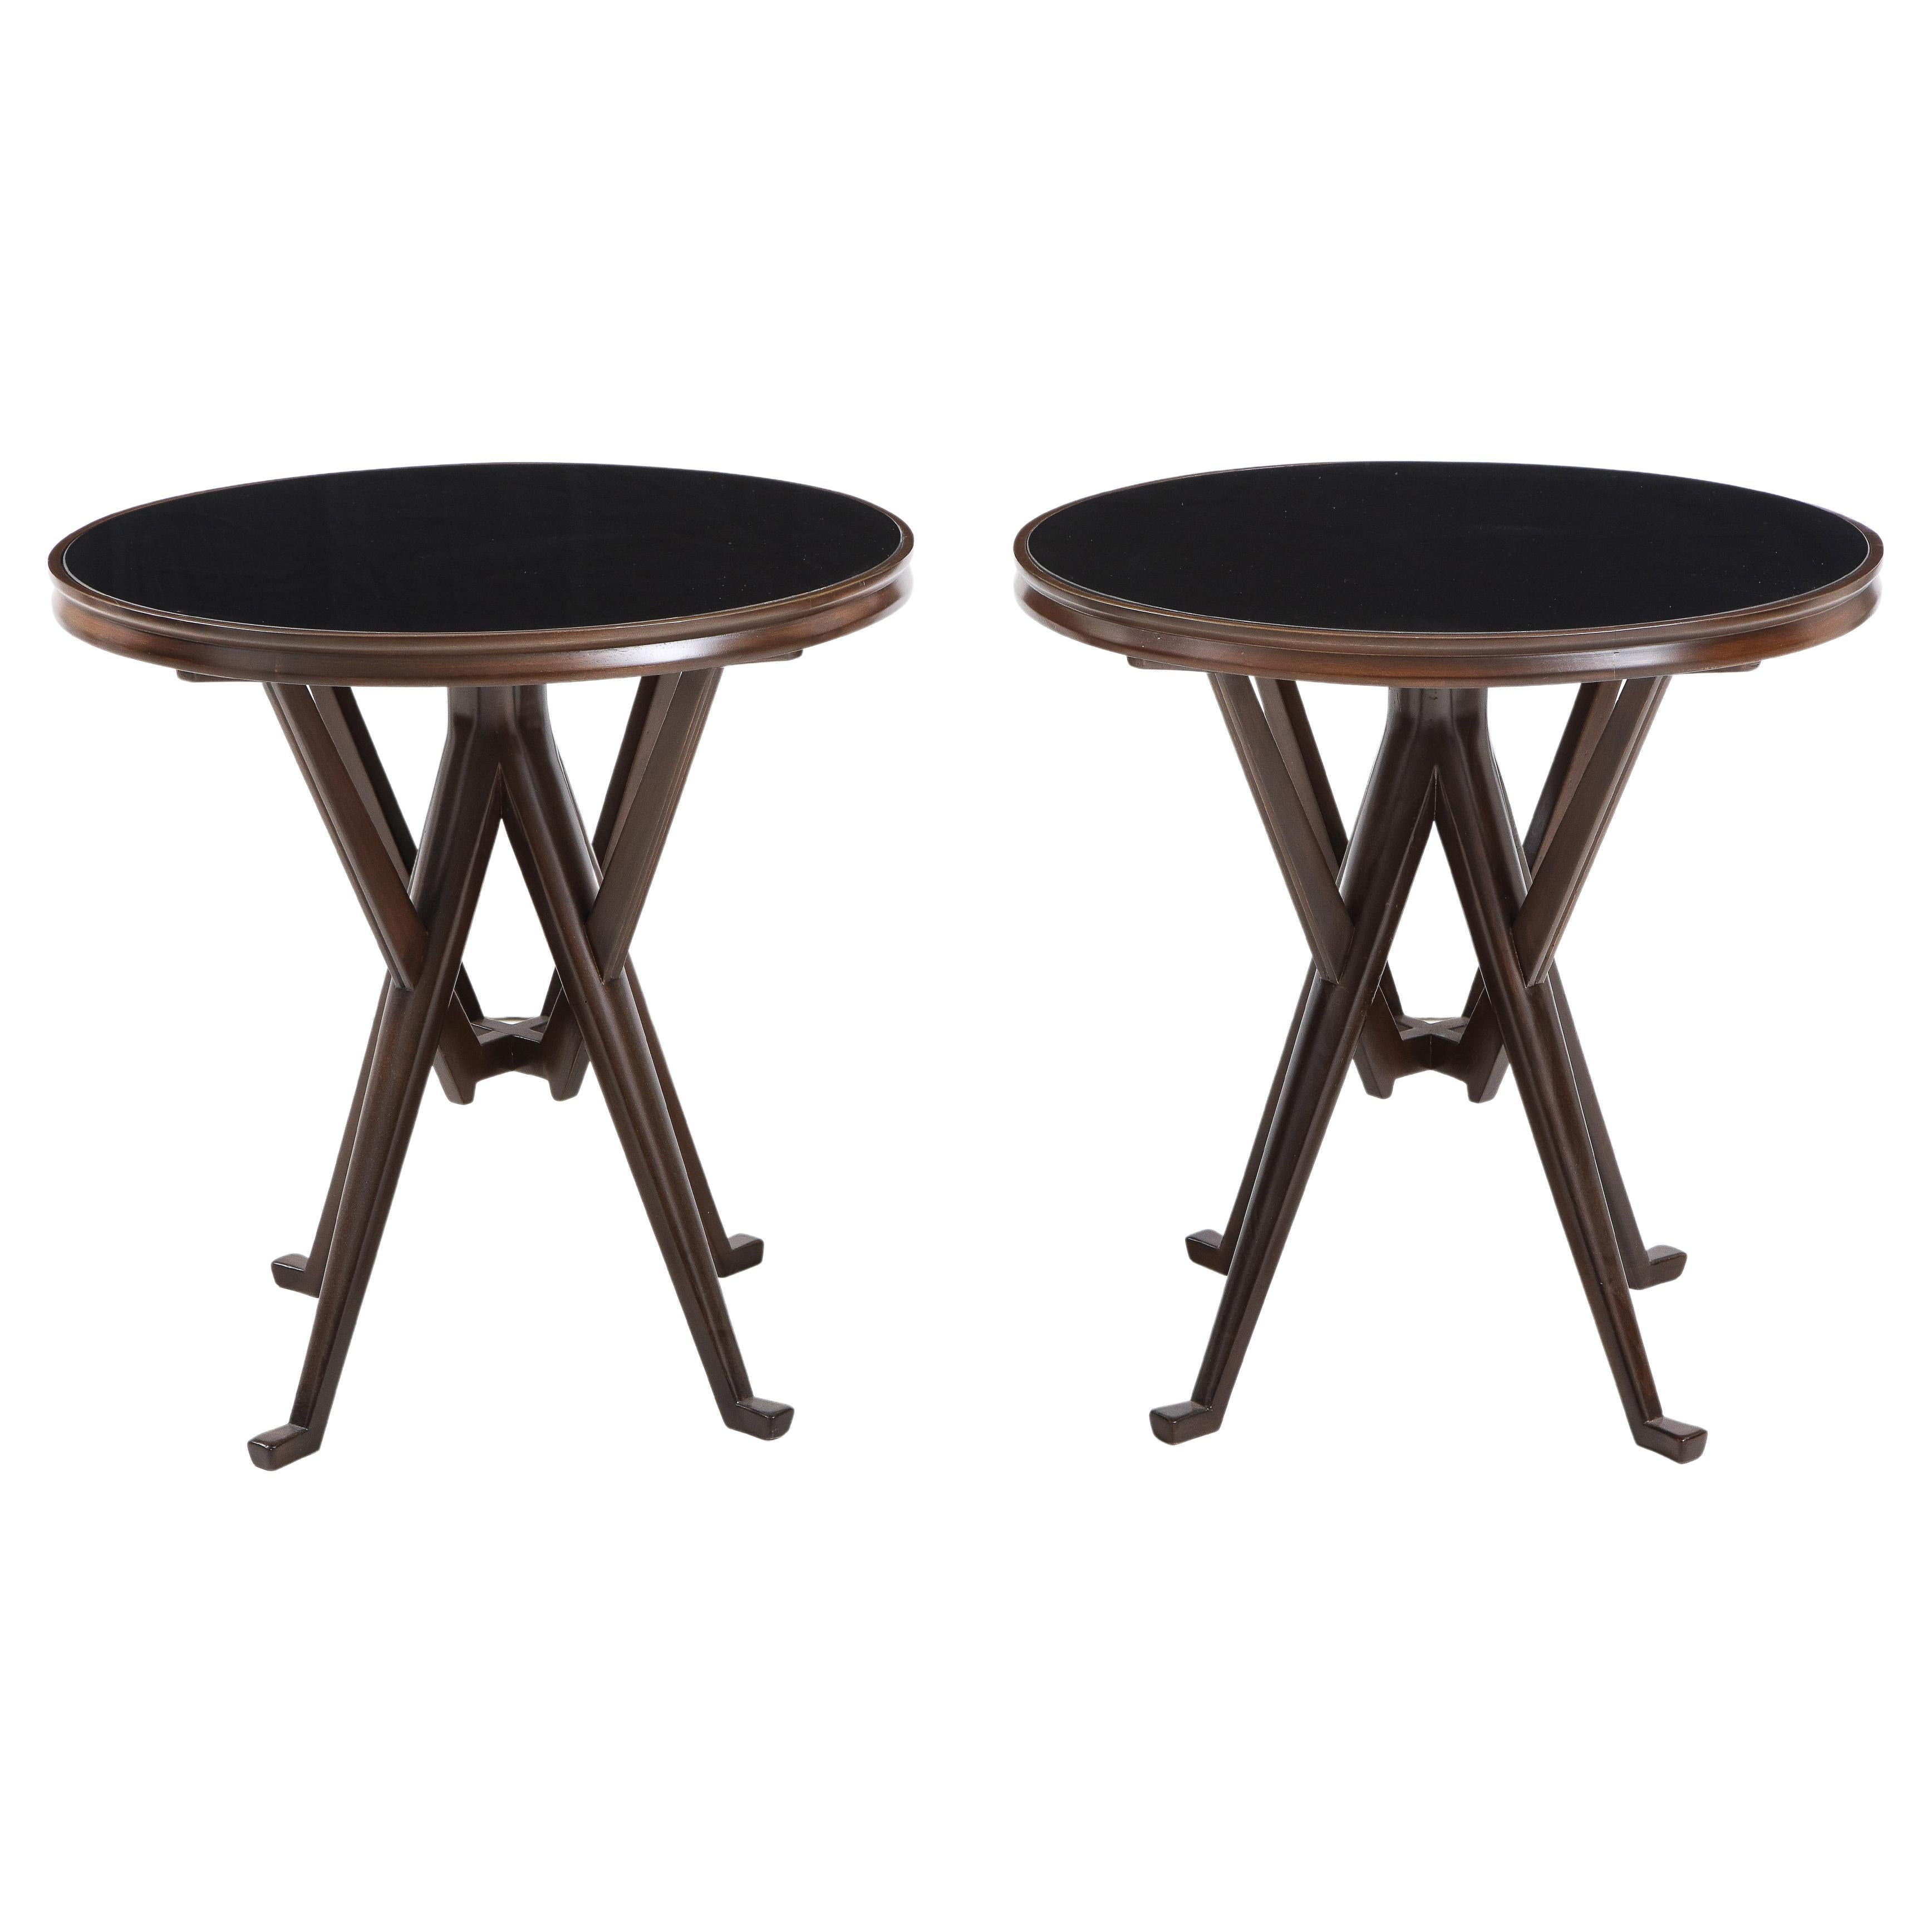 Pair of Italian Circular Wood and Glass Tables Attributed to Ico Parisi